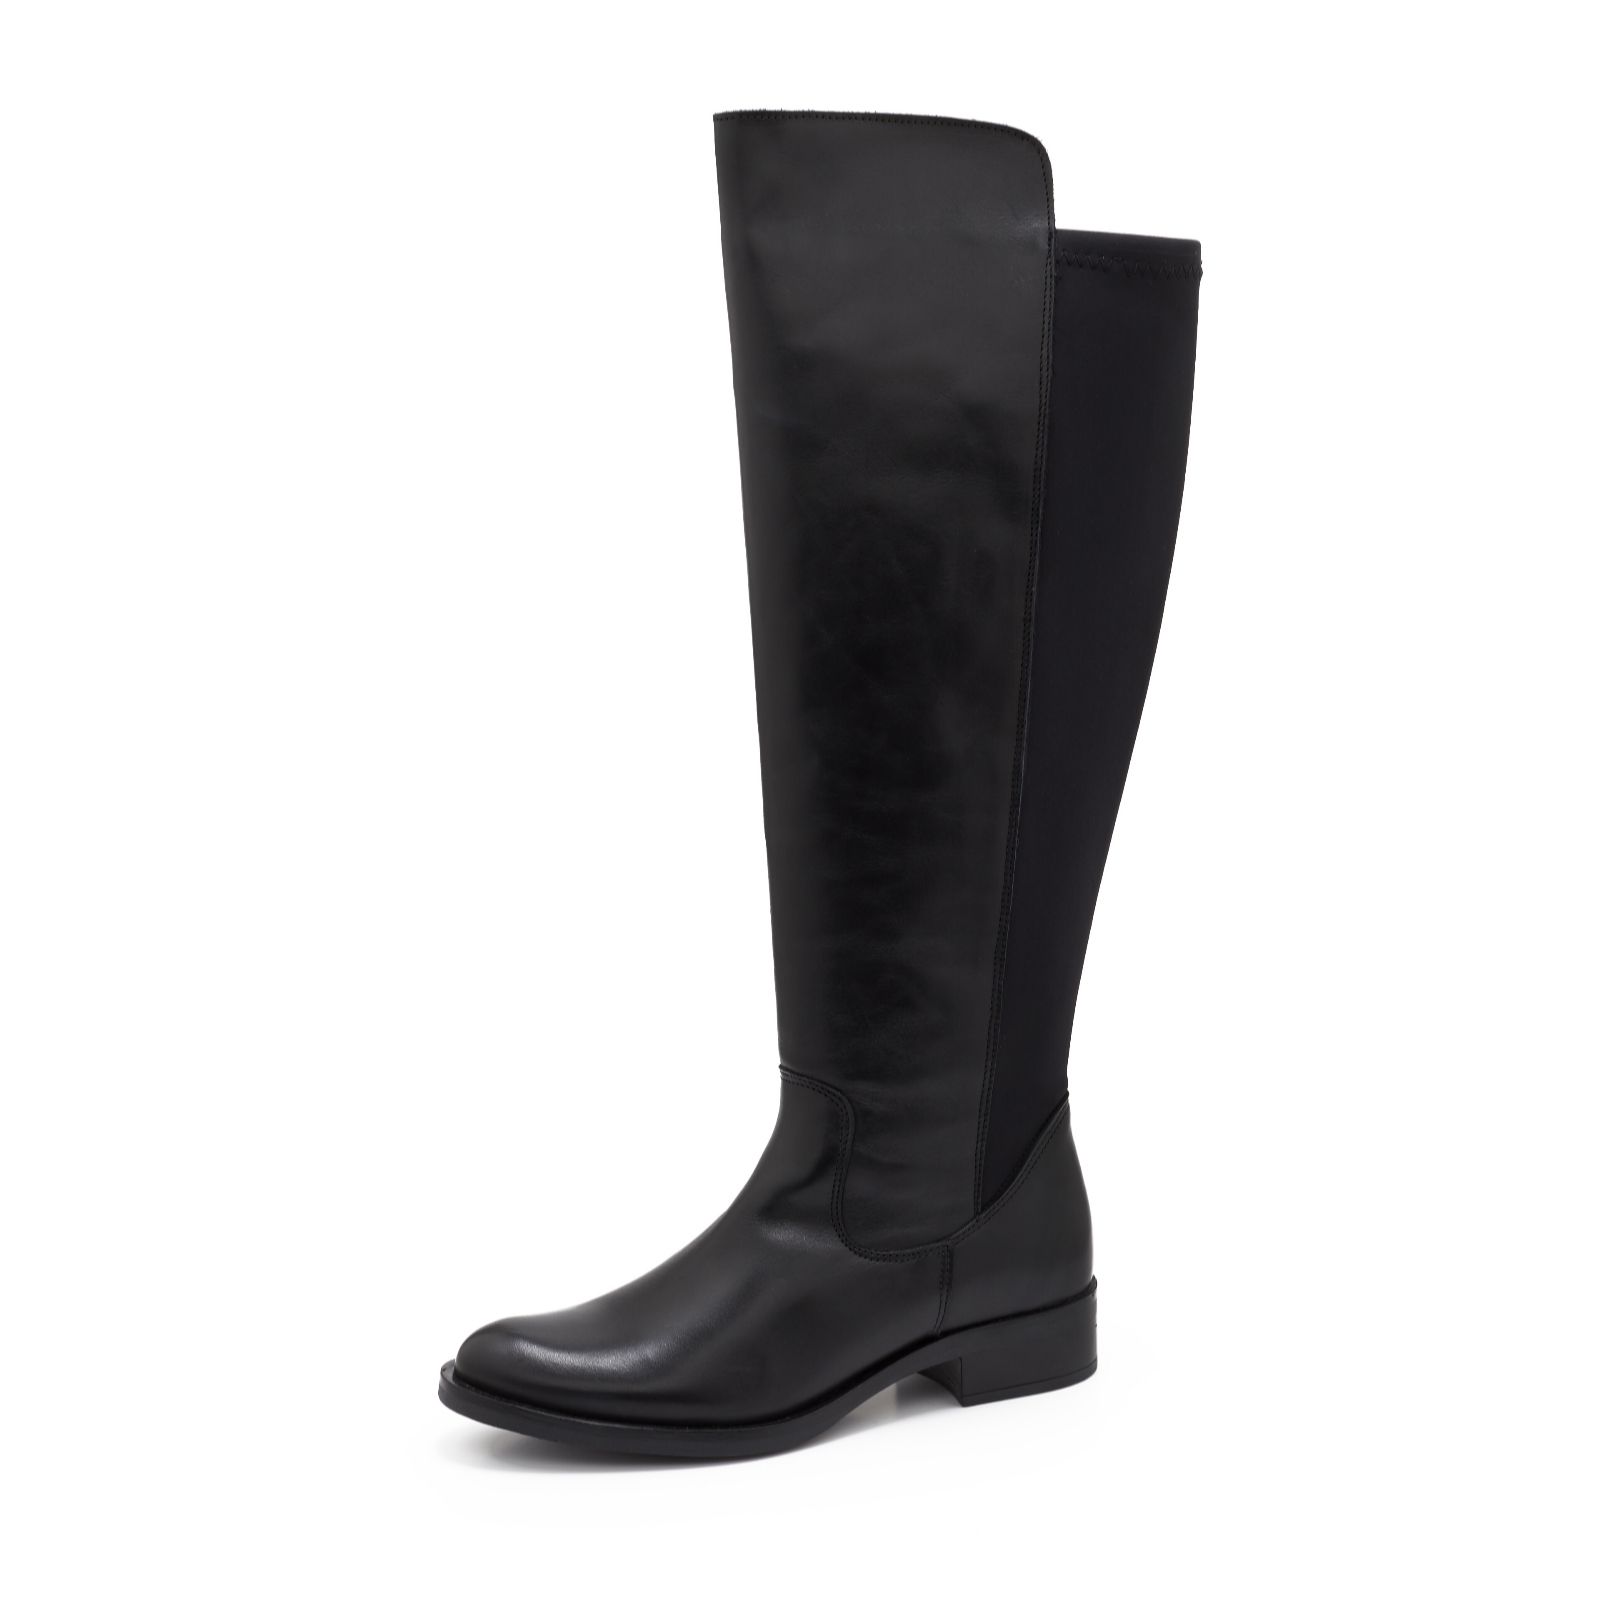 clarks knee length boots